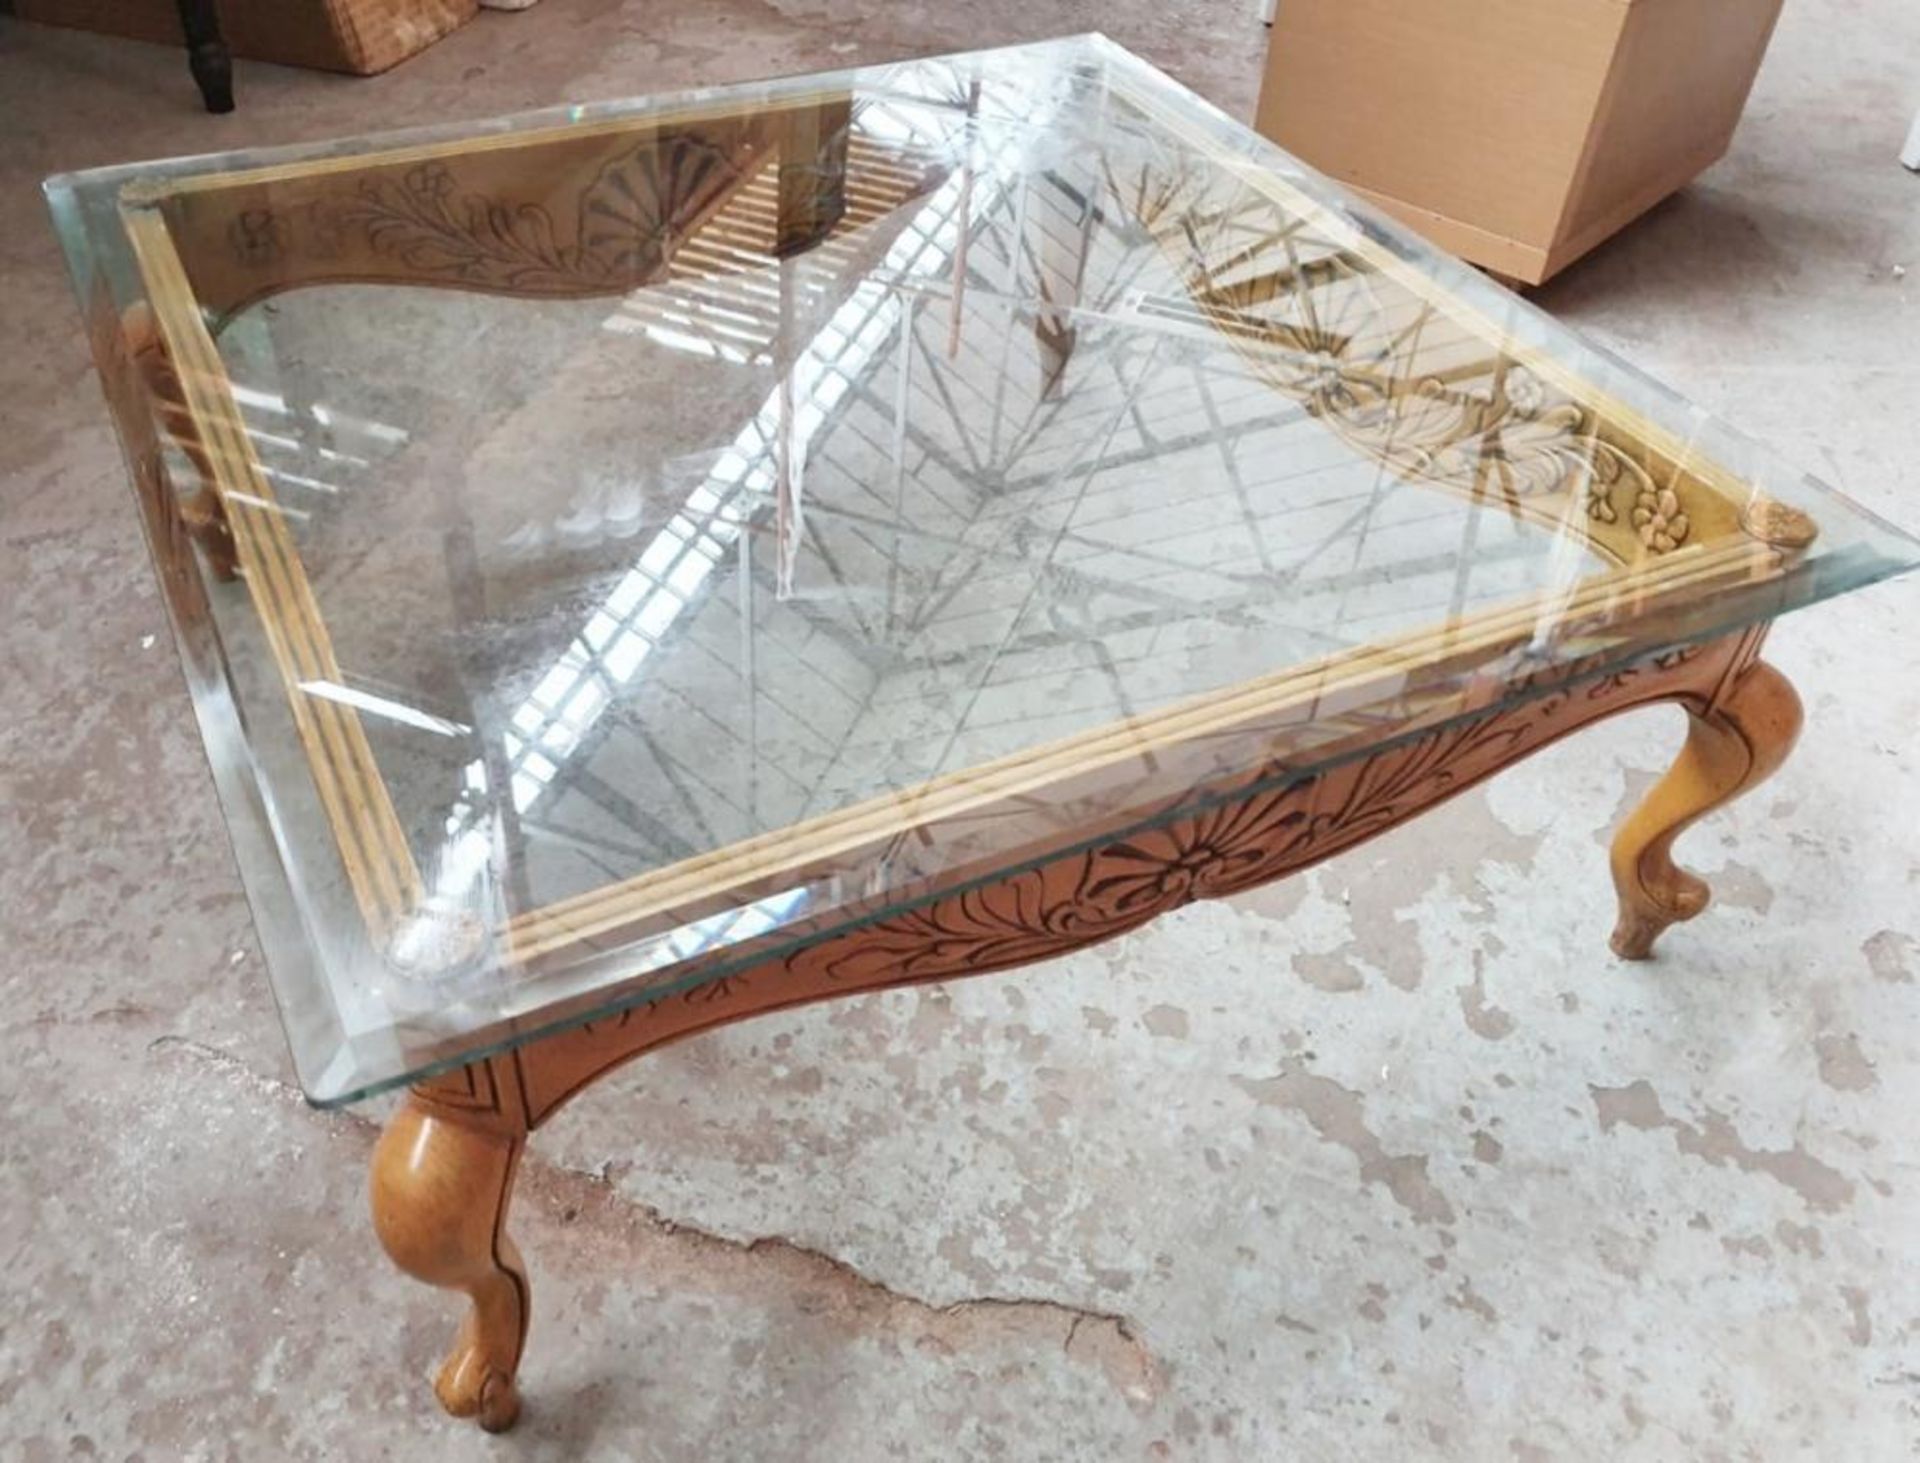 1 x Ornate Glass Topped Coffee Table Featuring Floral Motifs To The Sides - Dimensions: W105 x D105 - Bild 4 aus 5